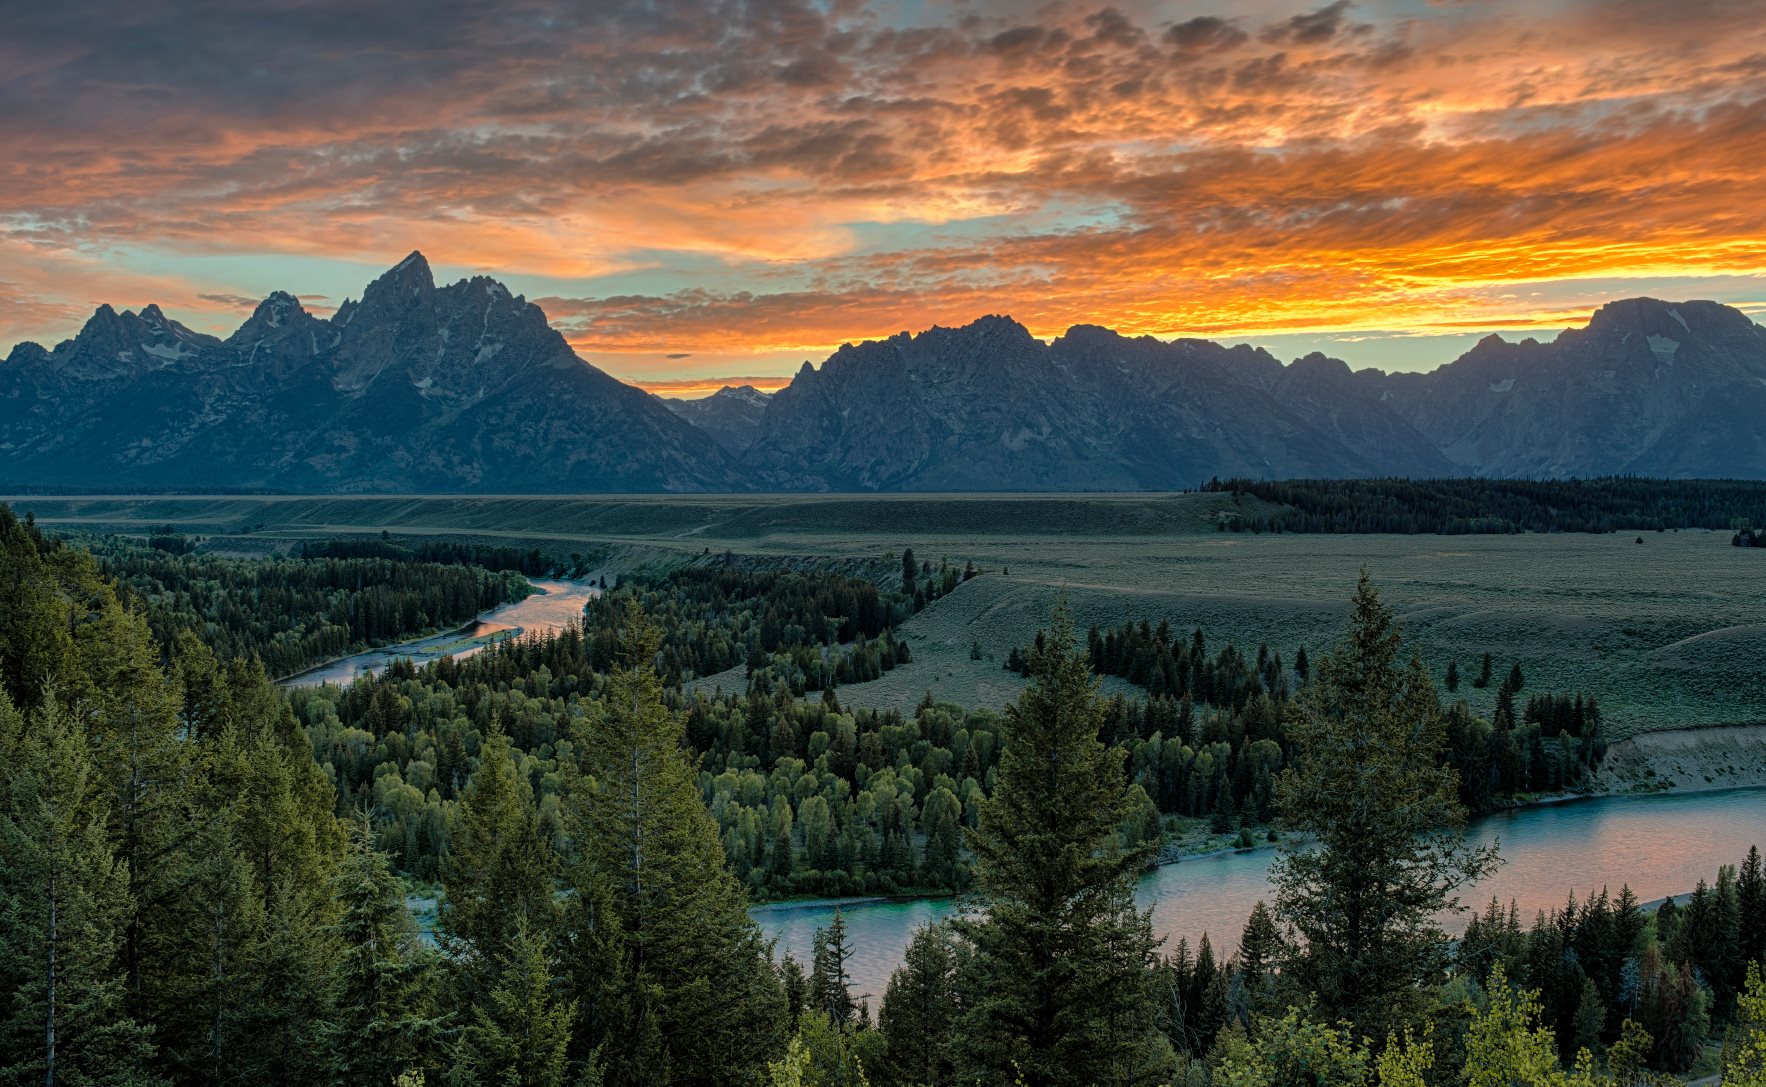 A summer sunset over the snake river and Grand Tetons.